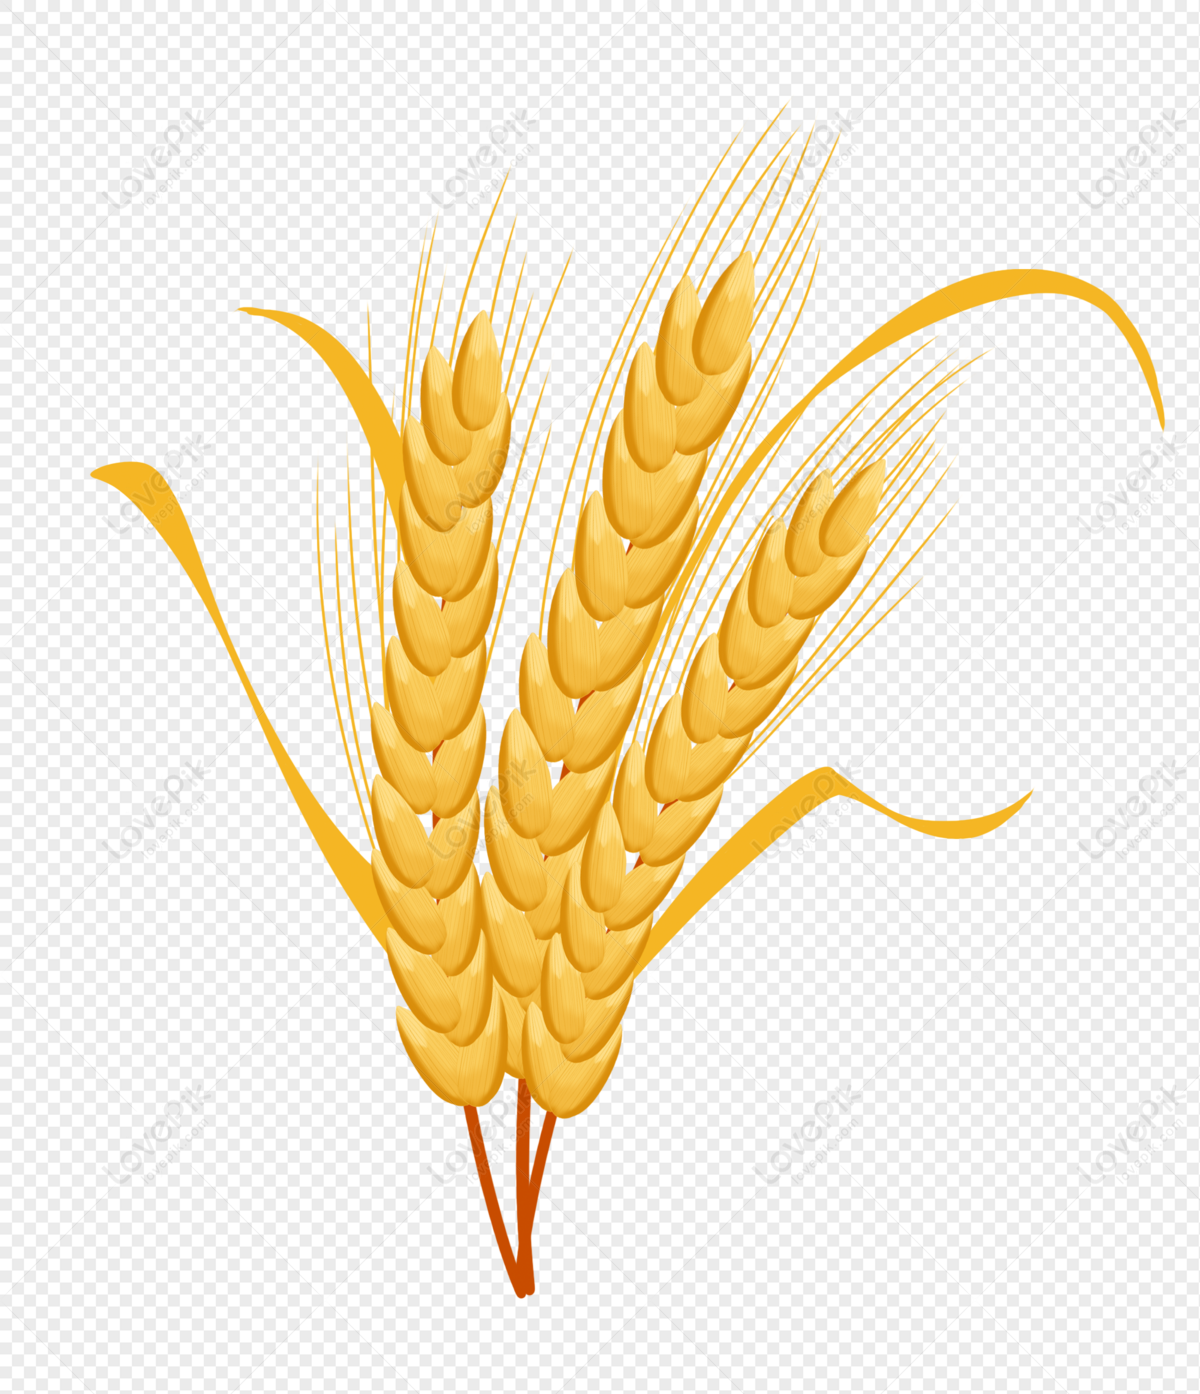 Golden Yellow Wheat PNG White Transparent And Clipart Image For Free  Download - Lovepik | 401361082